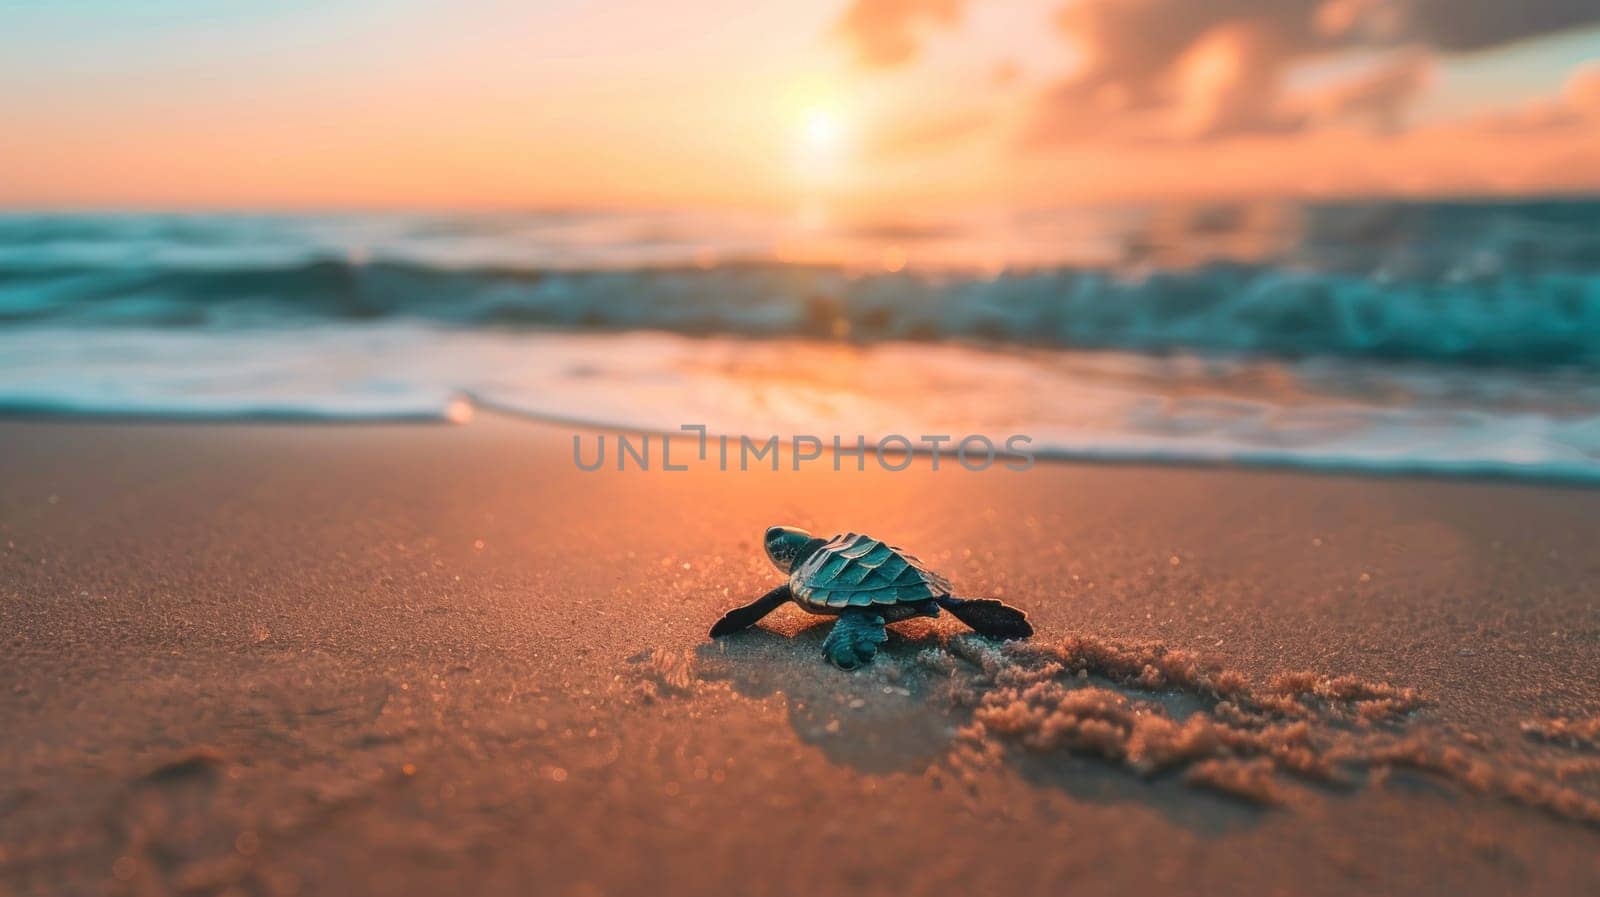 A baby turtle is laying on the beach at sunset. The turtle is small and he is alone. The scene is peaceful and serene, with the sun setting in the background